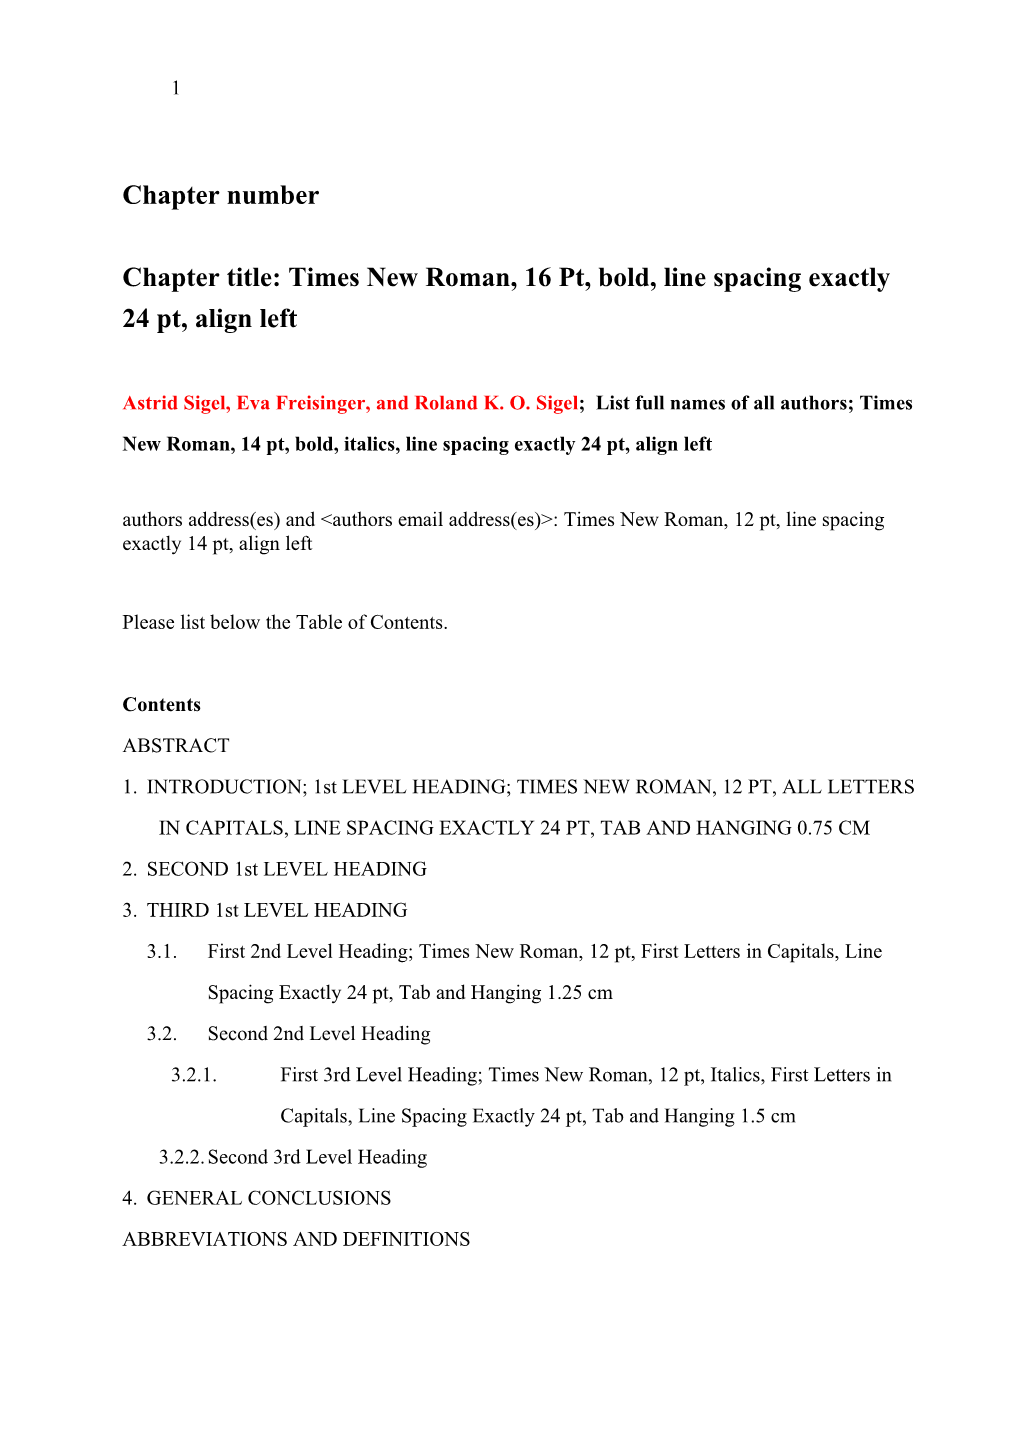 Chapter Title: Times New Roman, 16 Pt, Bold, Line Spacing Exactly 24 Pt, Align Left